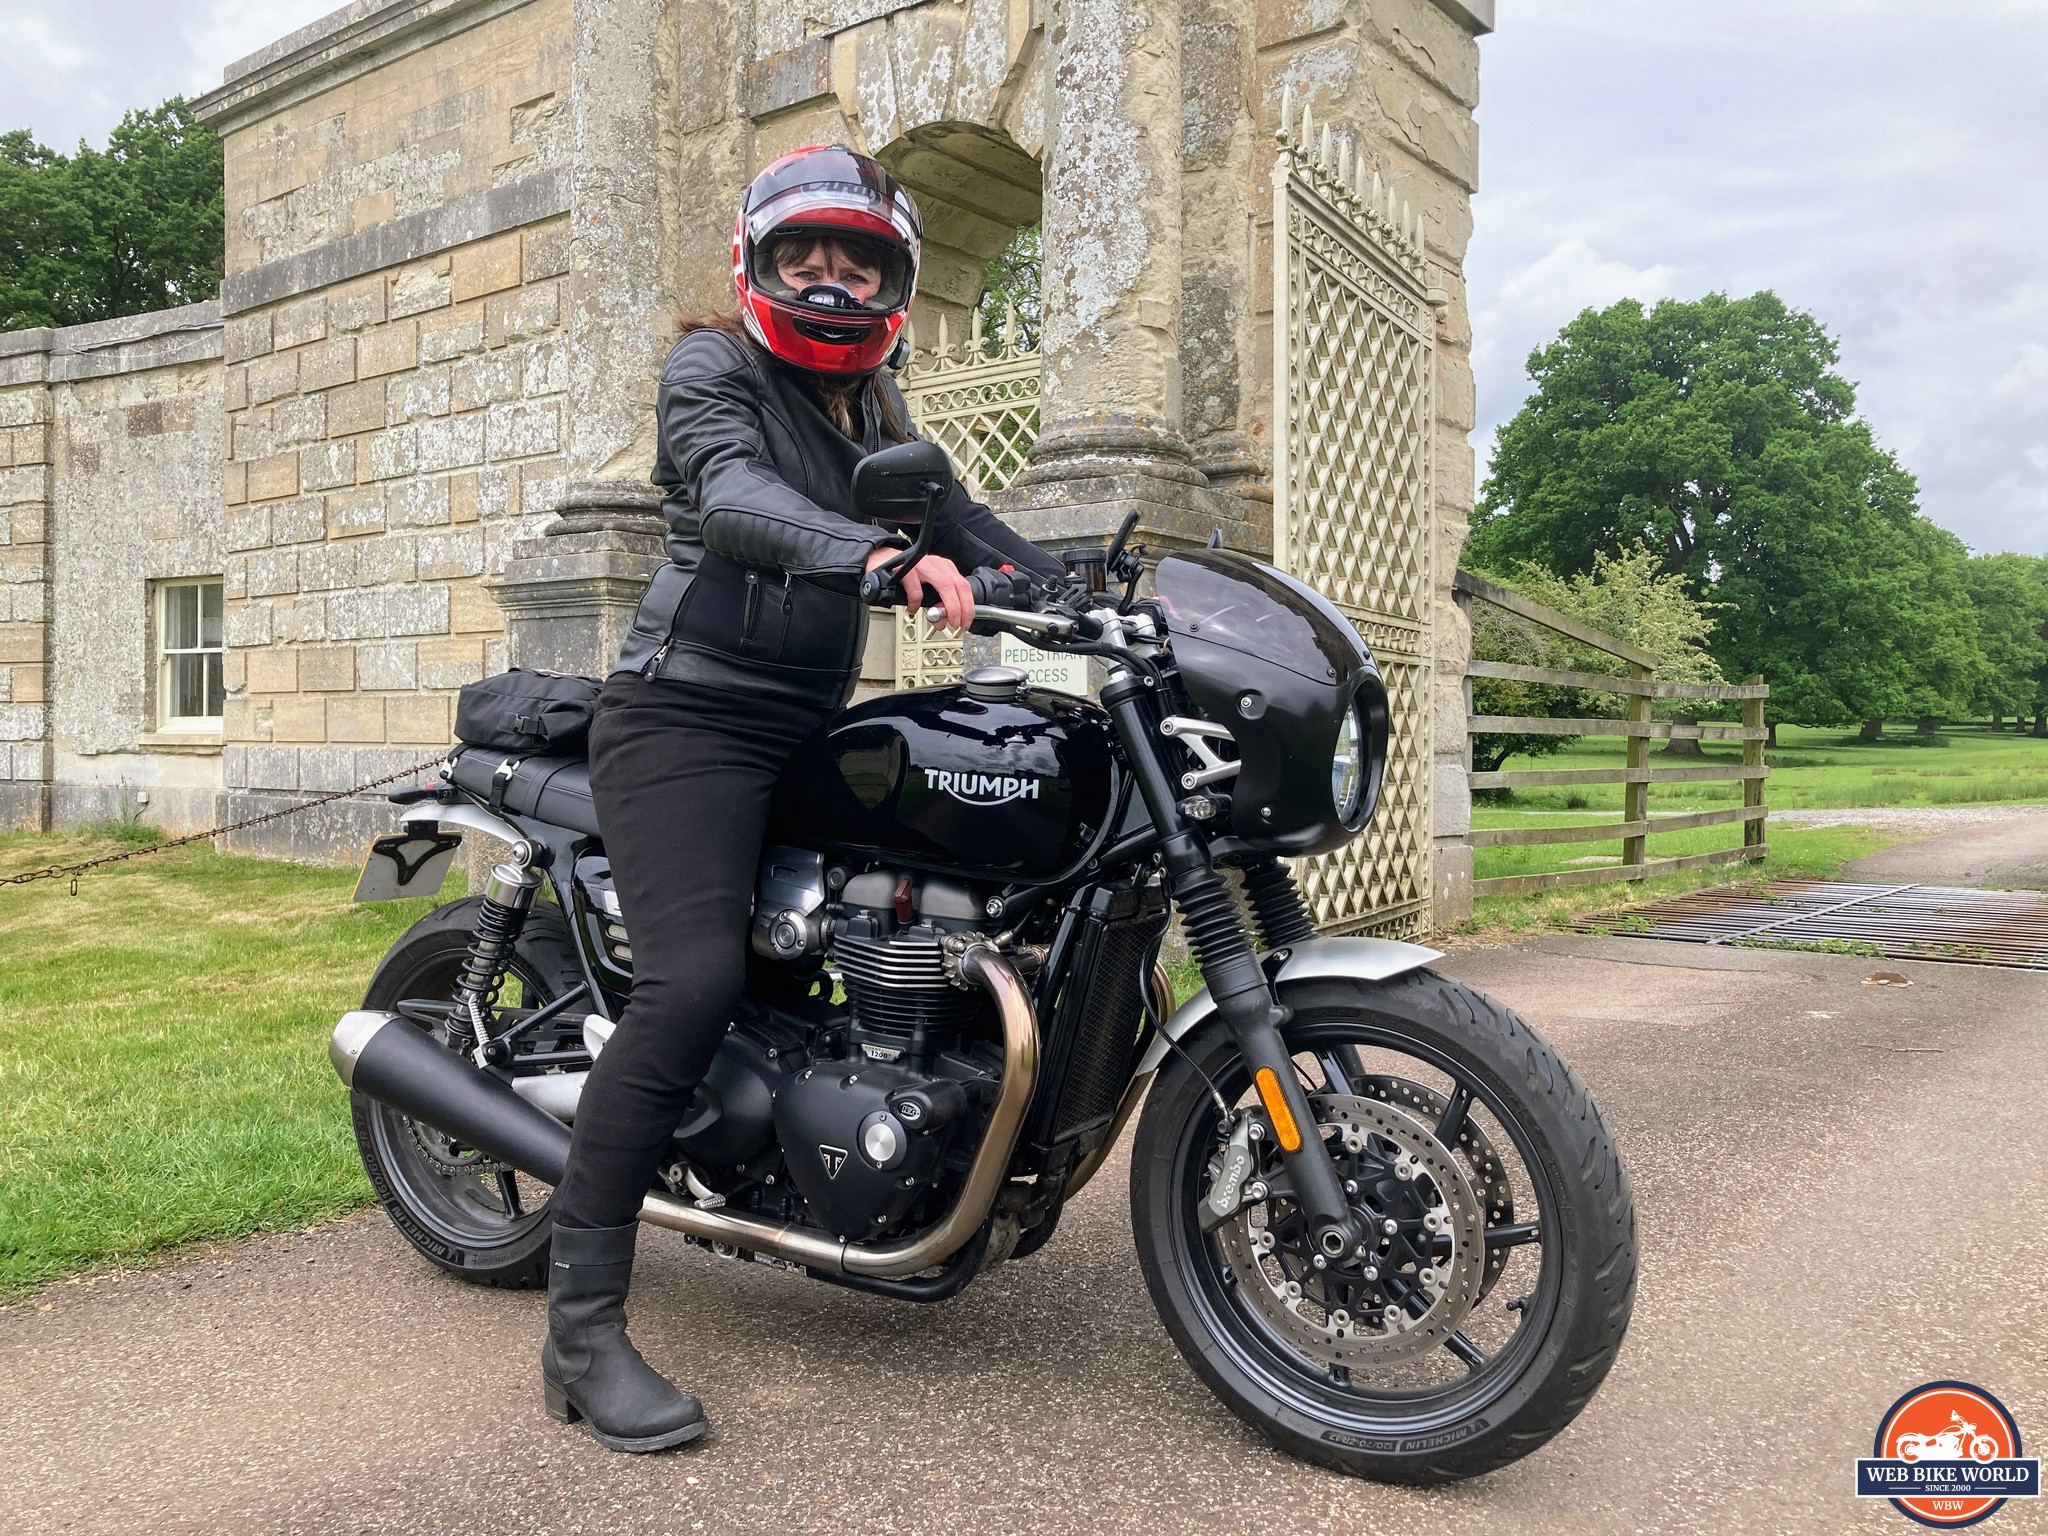 Rider wearing a helmet on a Triumph motorcycle